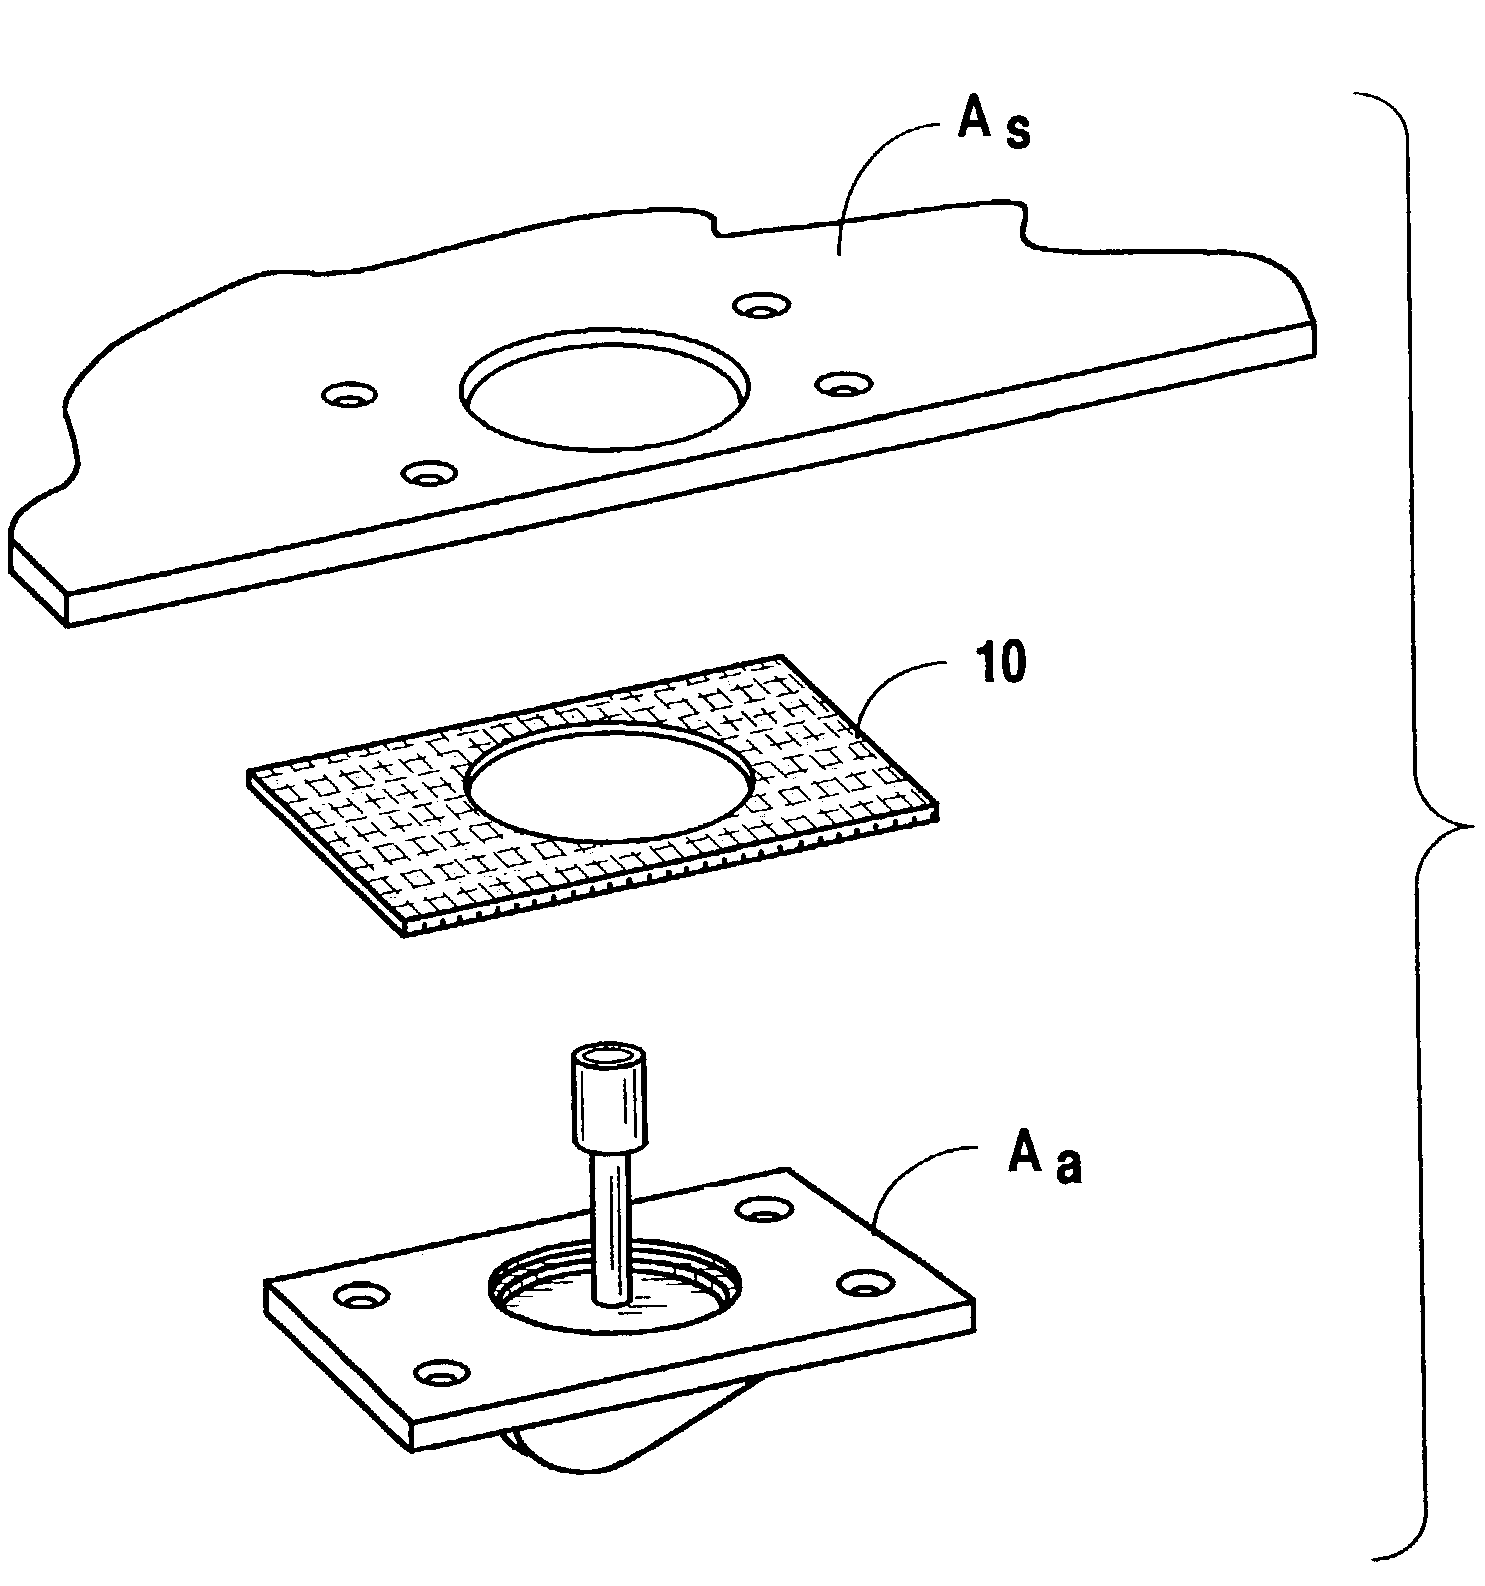 Foam bodied gasket and gasket tape and method of making and using the same